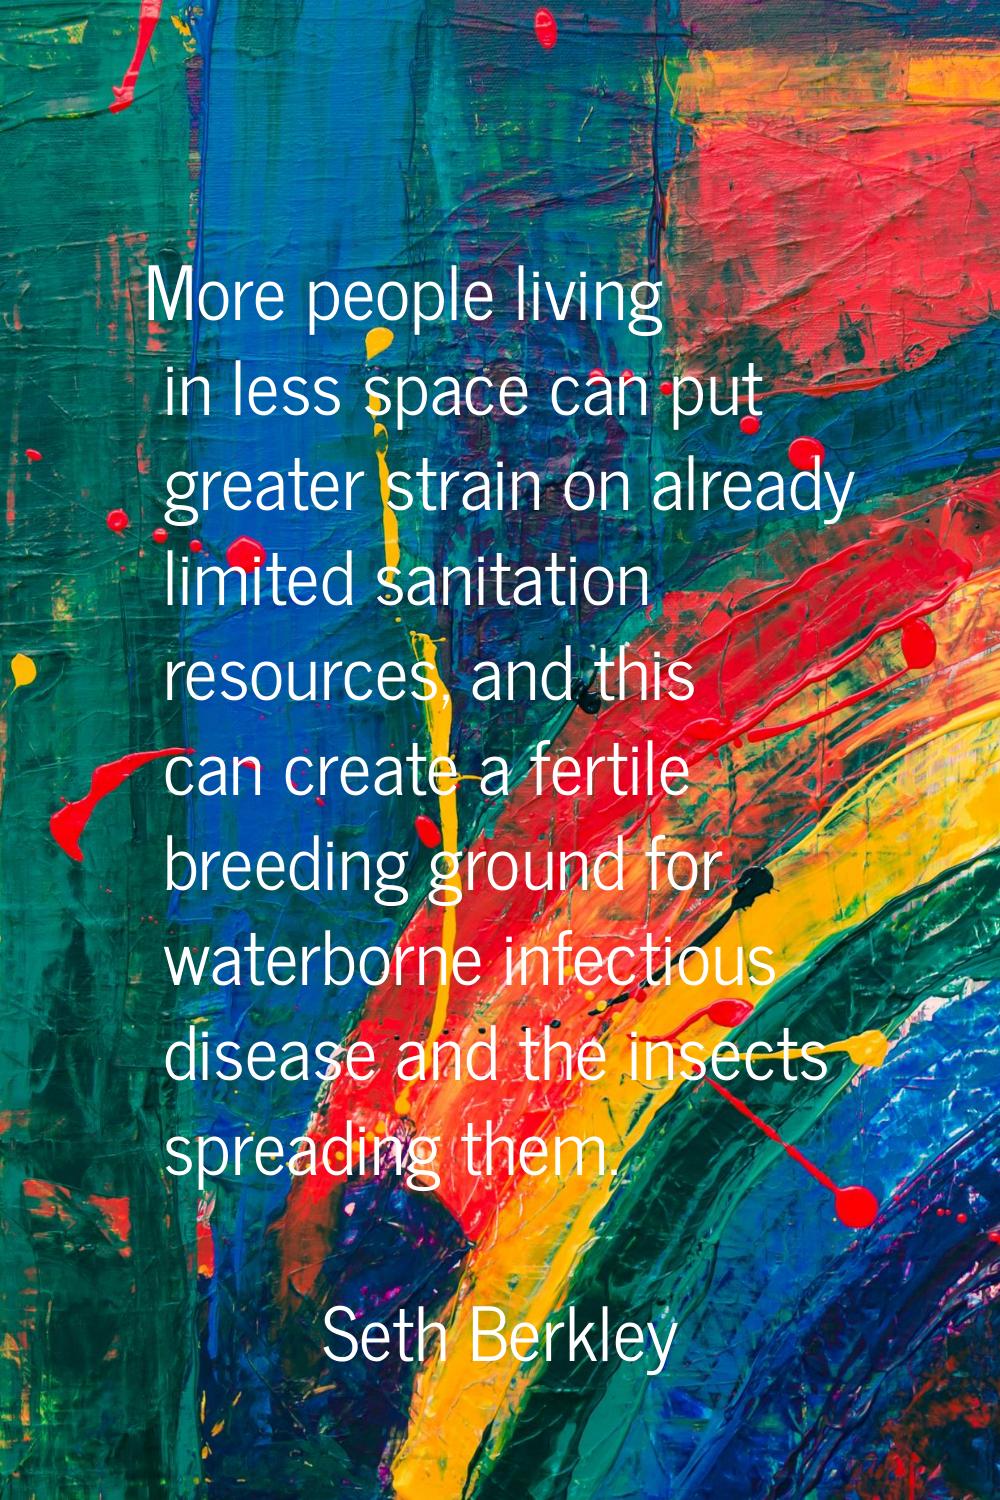 More people living in less space can put greater strain on already limited sanitation resources, an